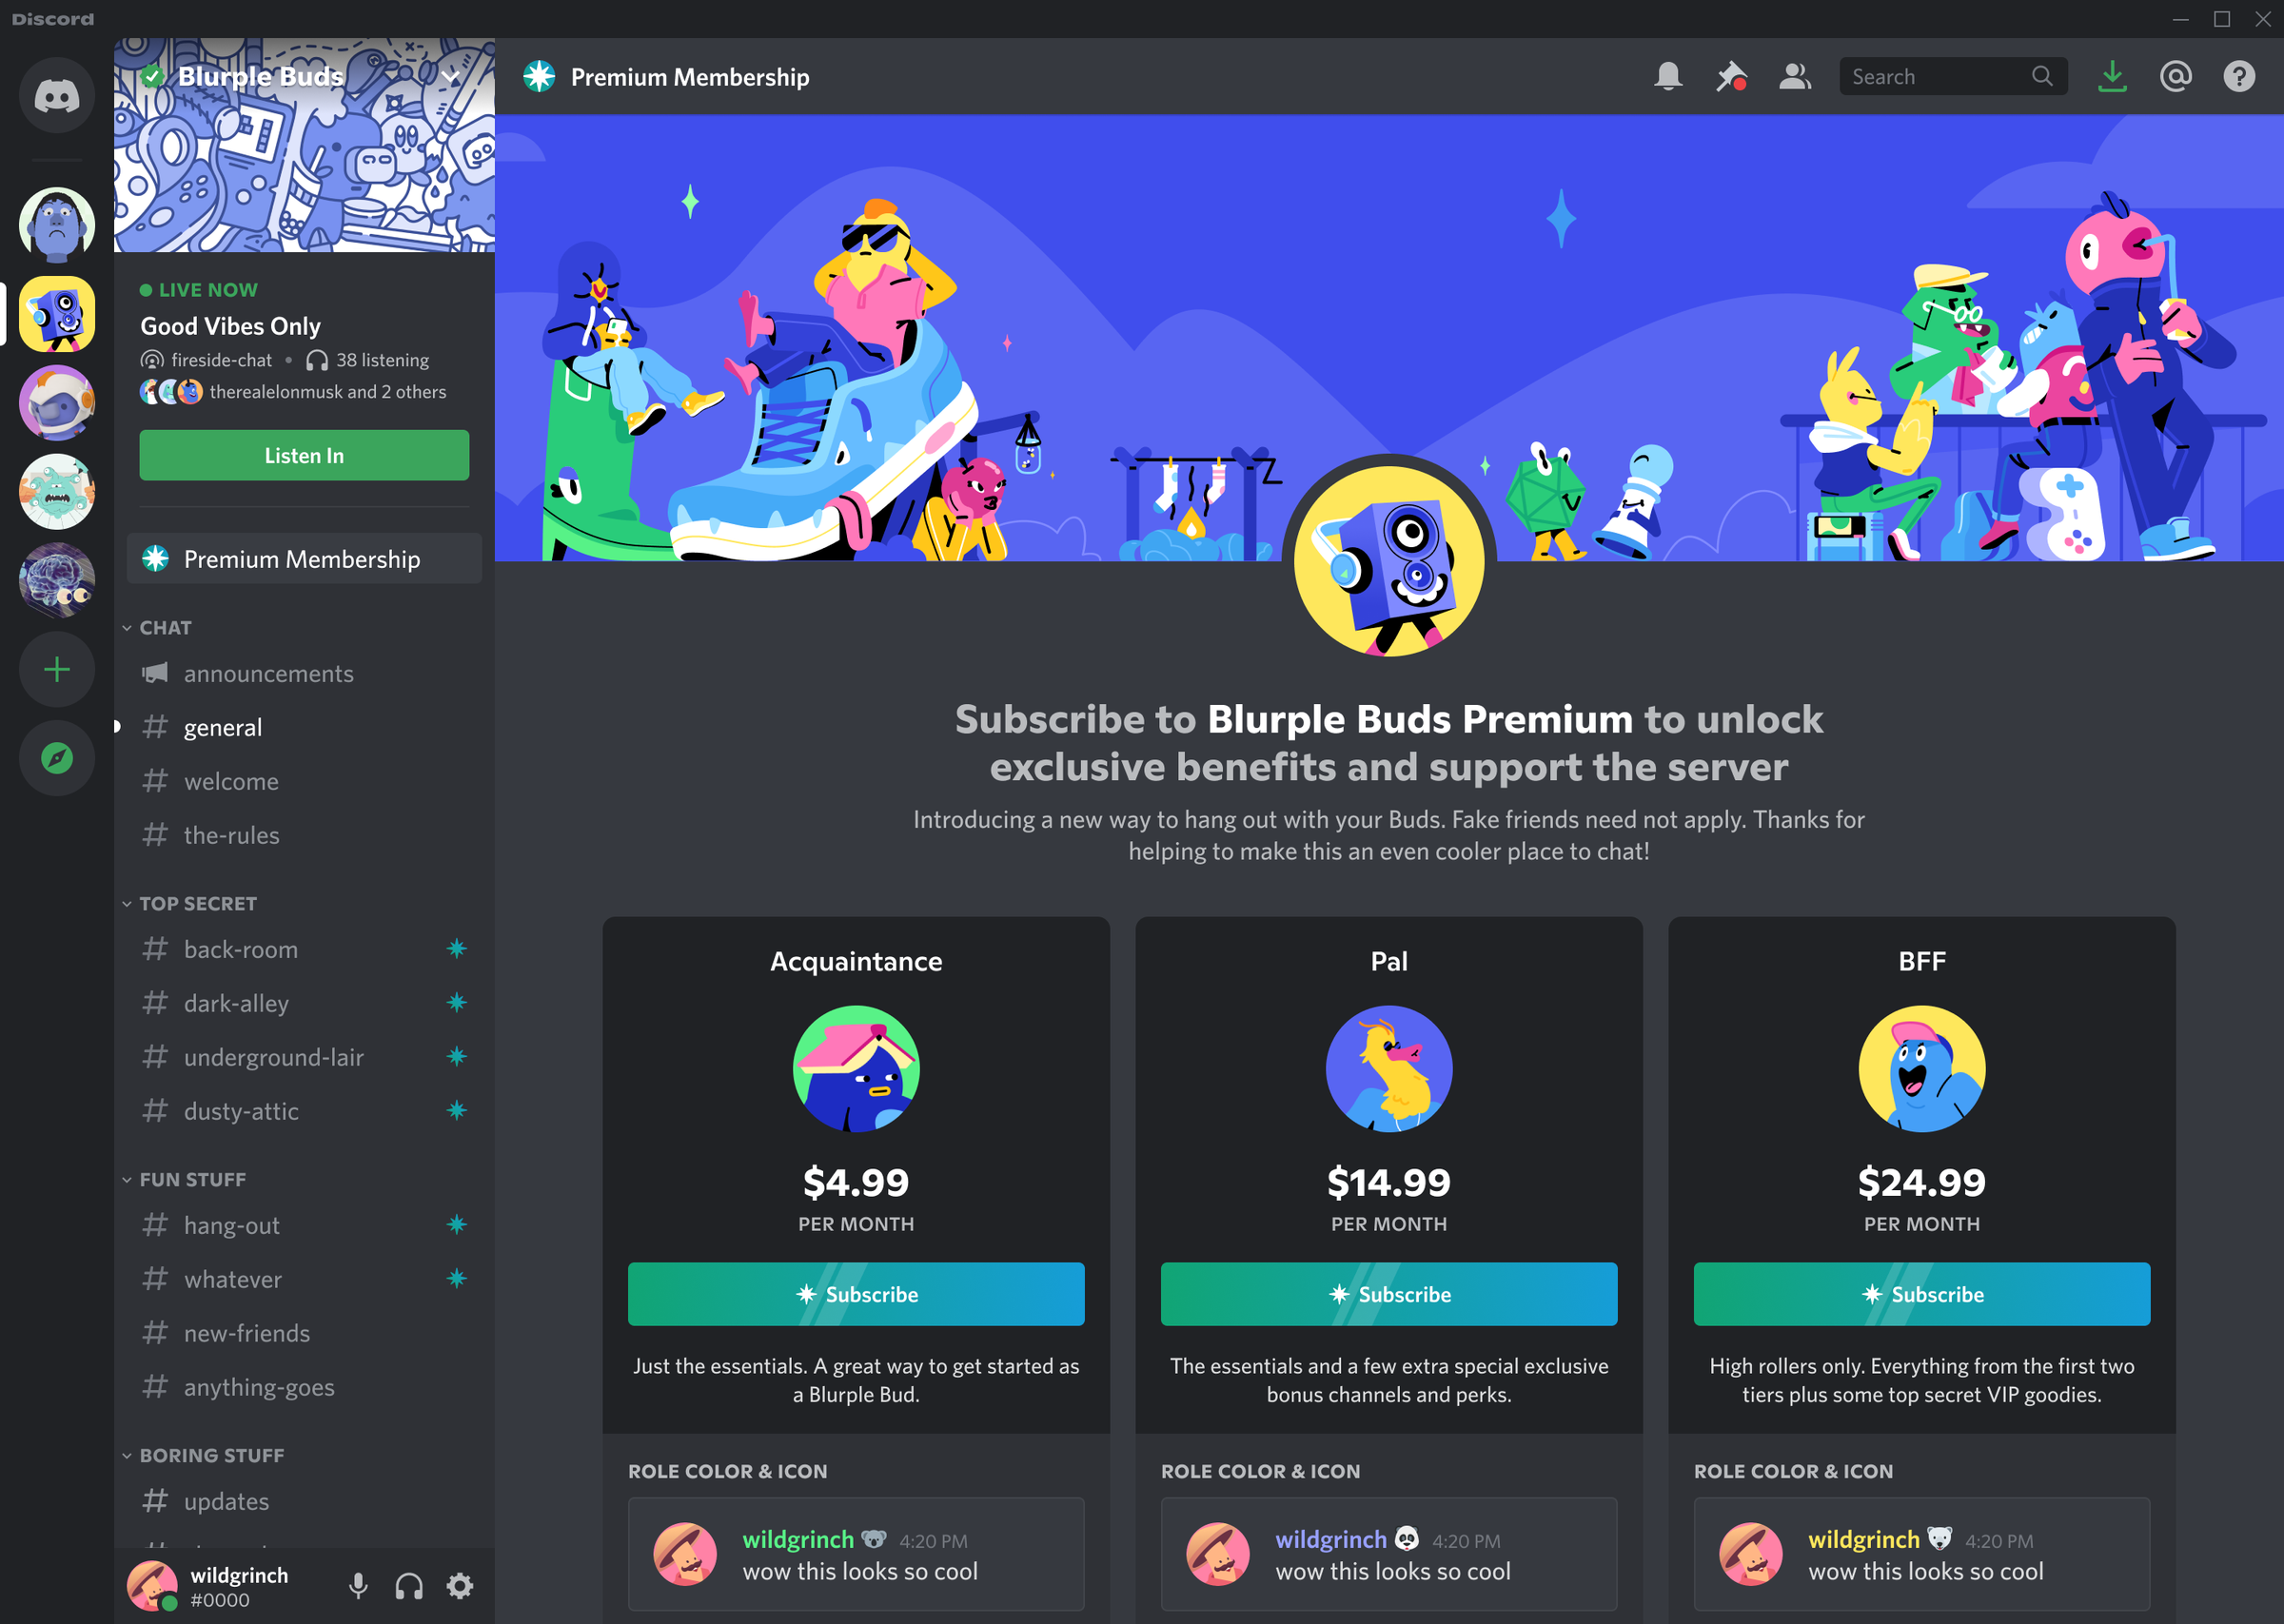 Discord’s new Premium Memberships include tiers for community servers.